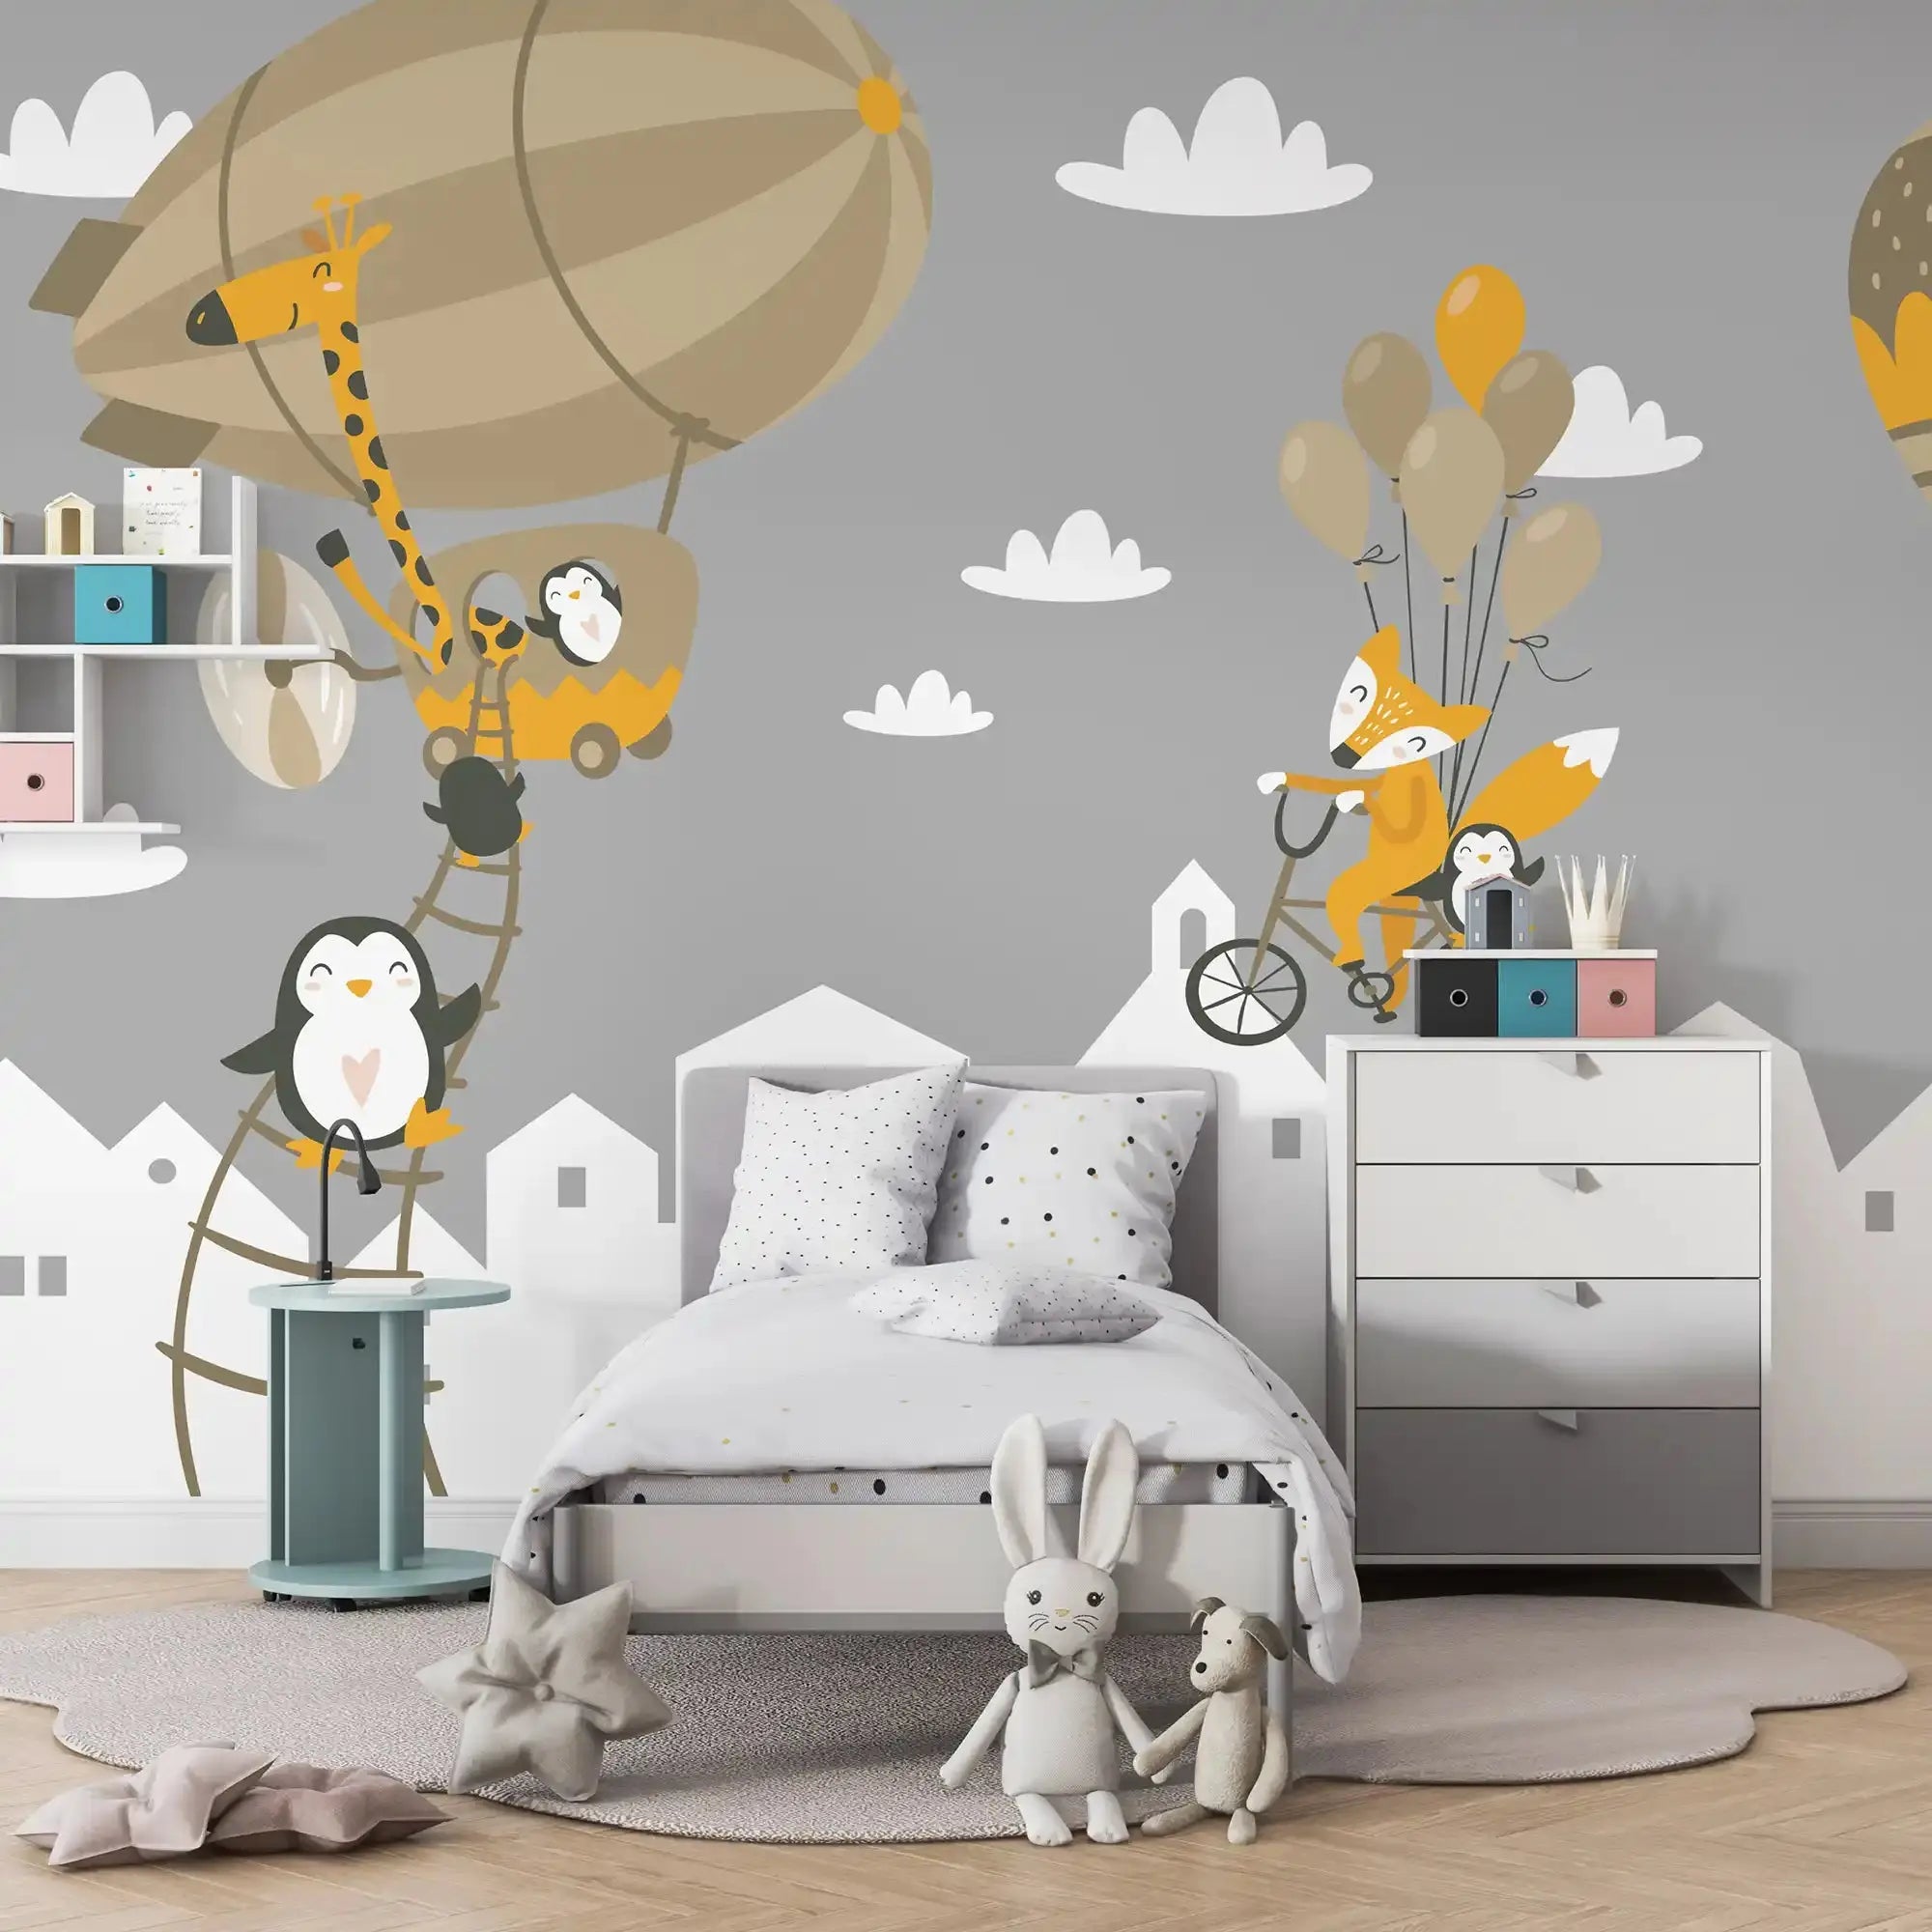 6013 / Kids Room Peel and Stick Wallpaper with Penguin and Hot Air Balloons Theme - Nursery Decor - Artevella